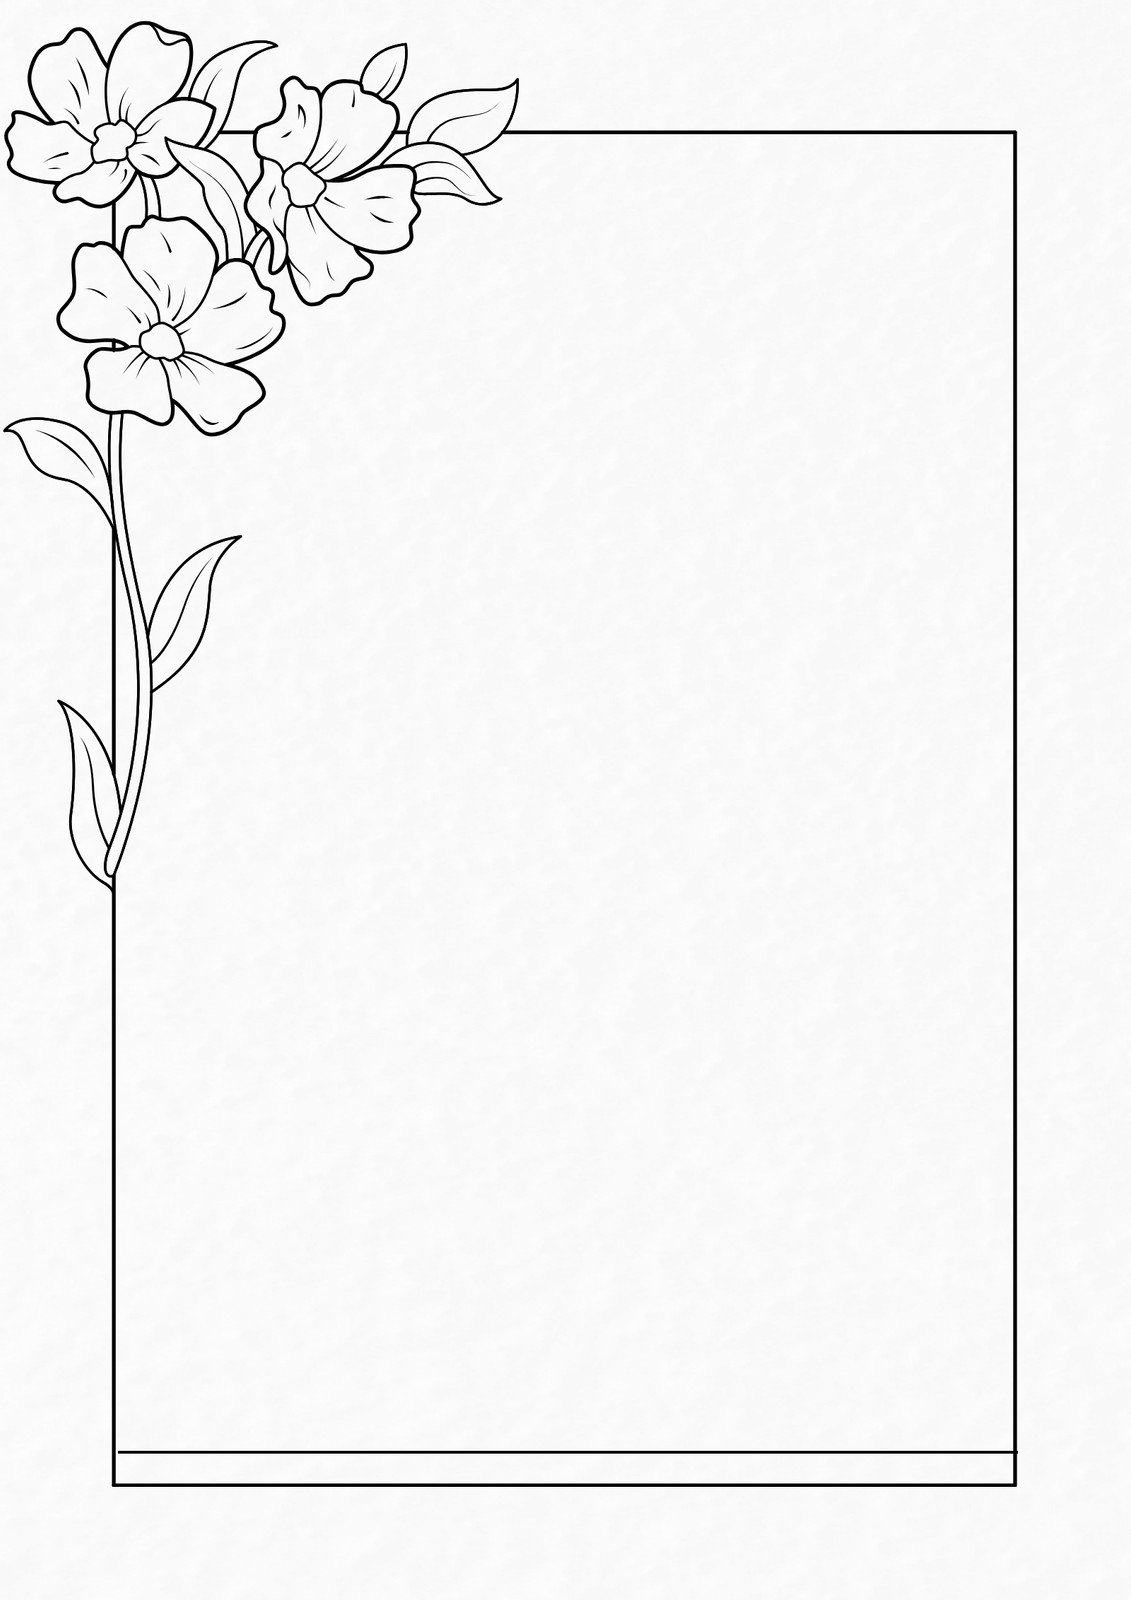 Floral border with flowers and leaves in line Vector Image